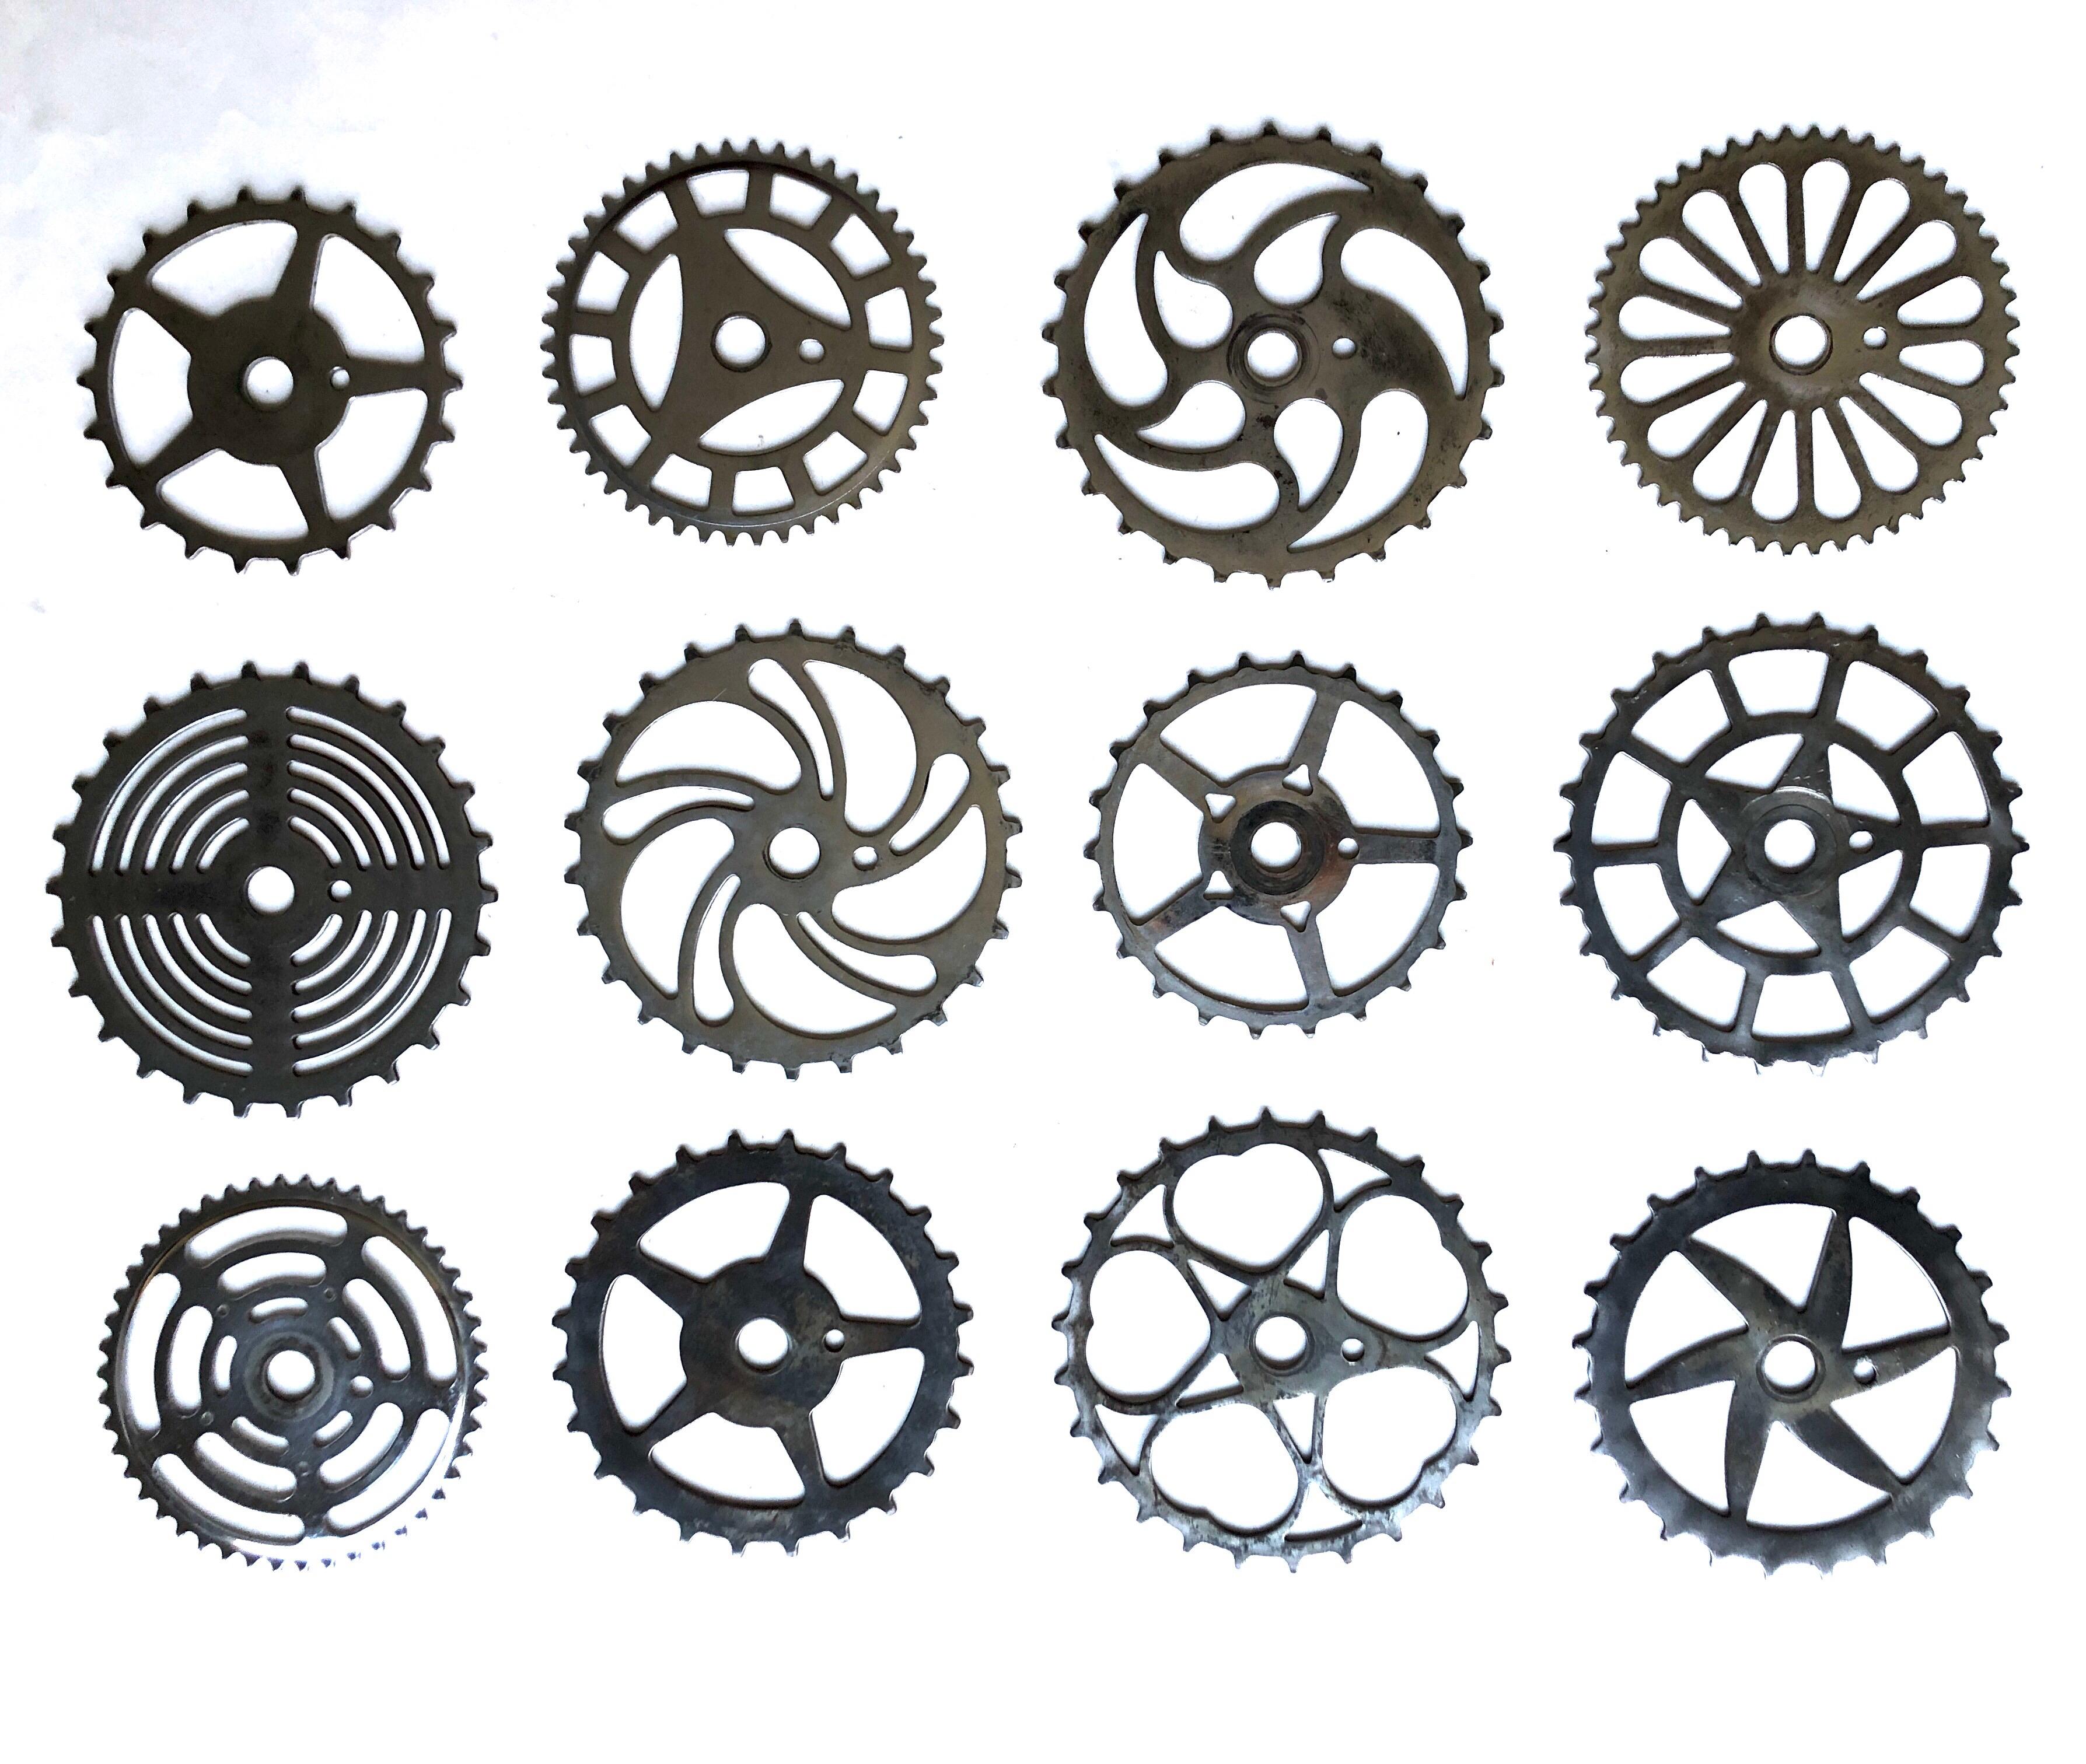 A collection of 12 antique and vintage bicycle sprockets dating from the 1930's to the 1960's. These are chrome plated and polished steel with surface patina. Wonderful graphic display with dozens of ways to display them. The smallest measures 7